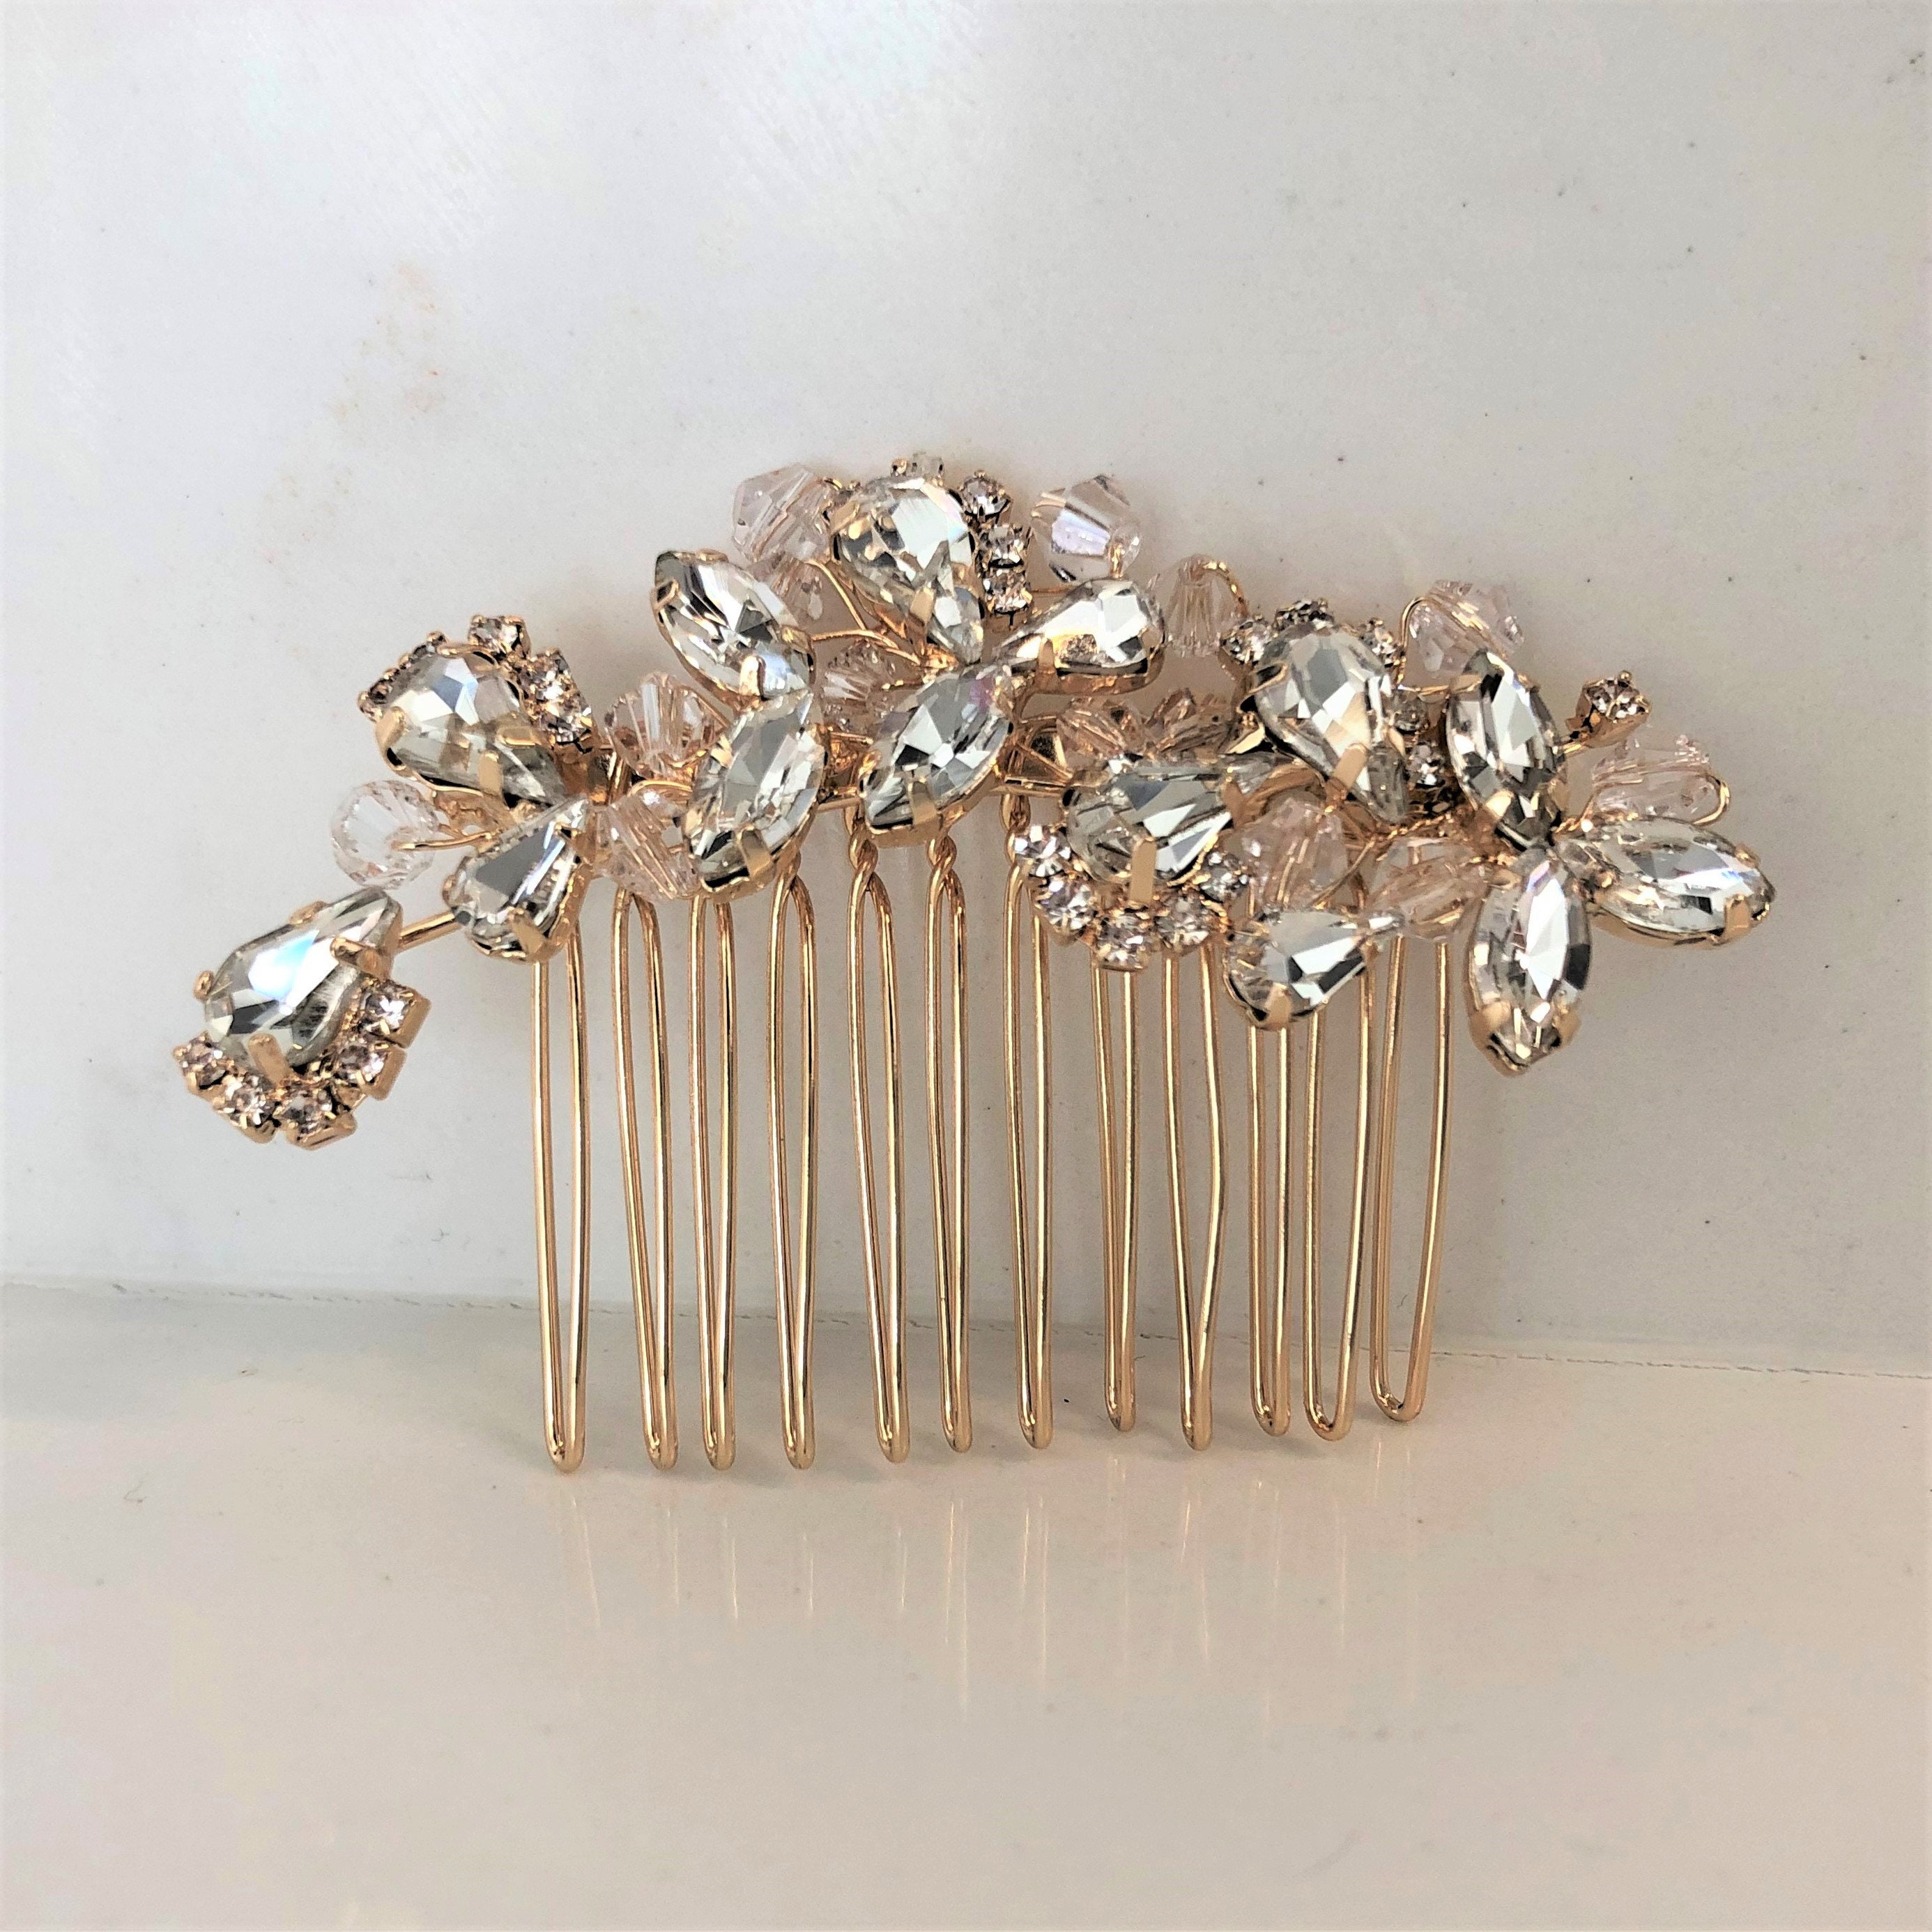 Classic gold or silver or rose gold rhinestone hair comb | Etsy